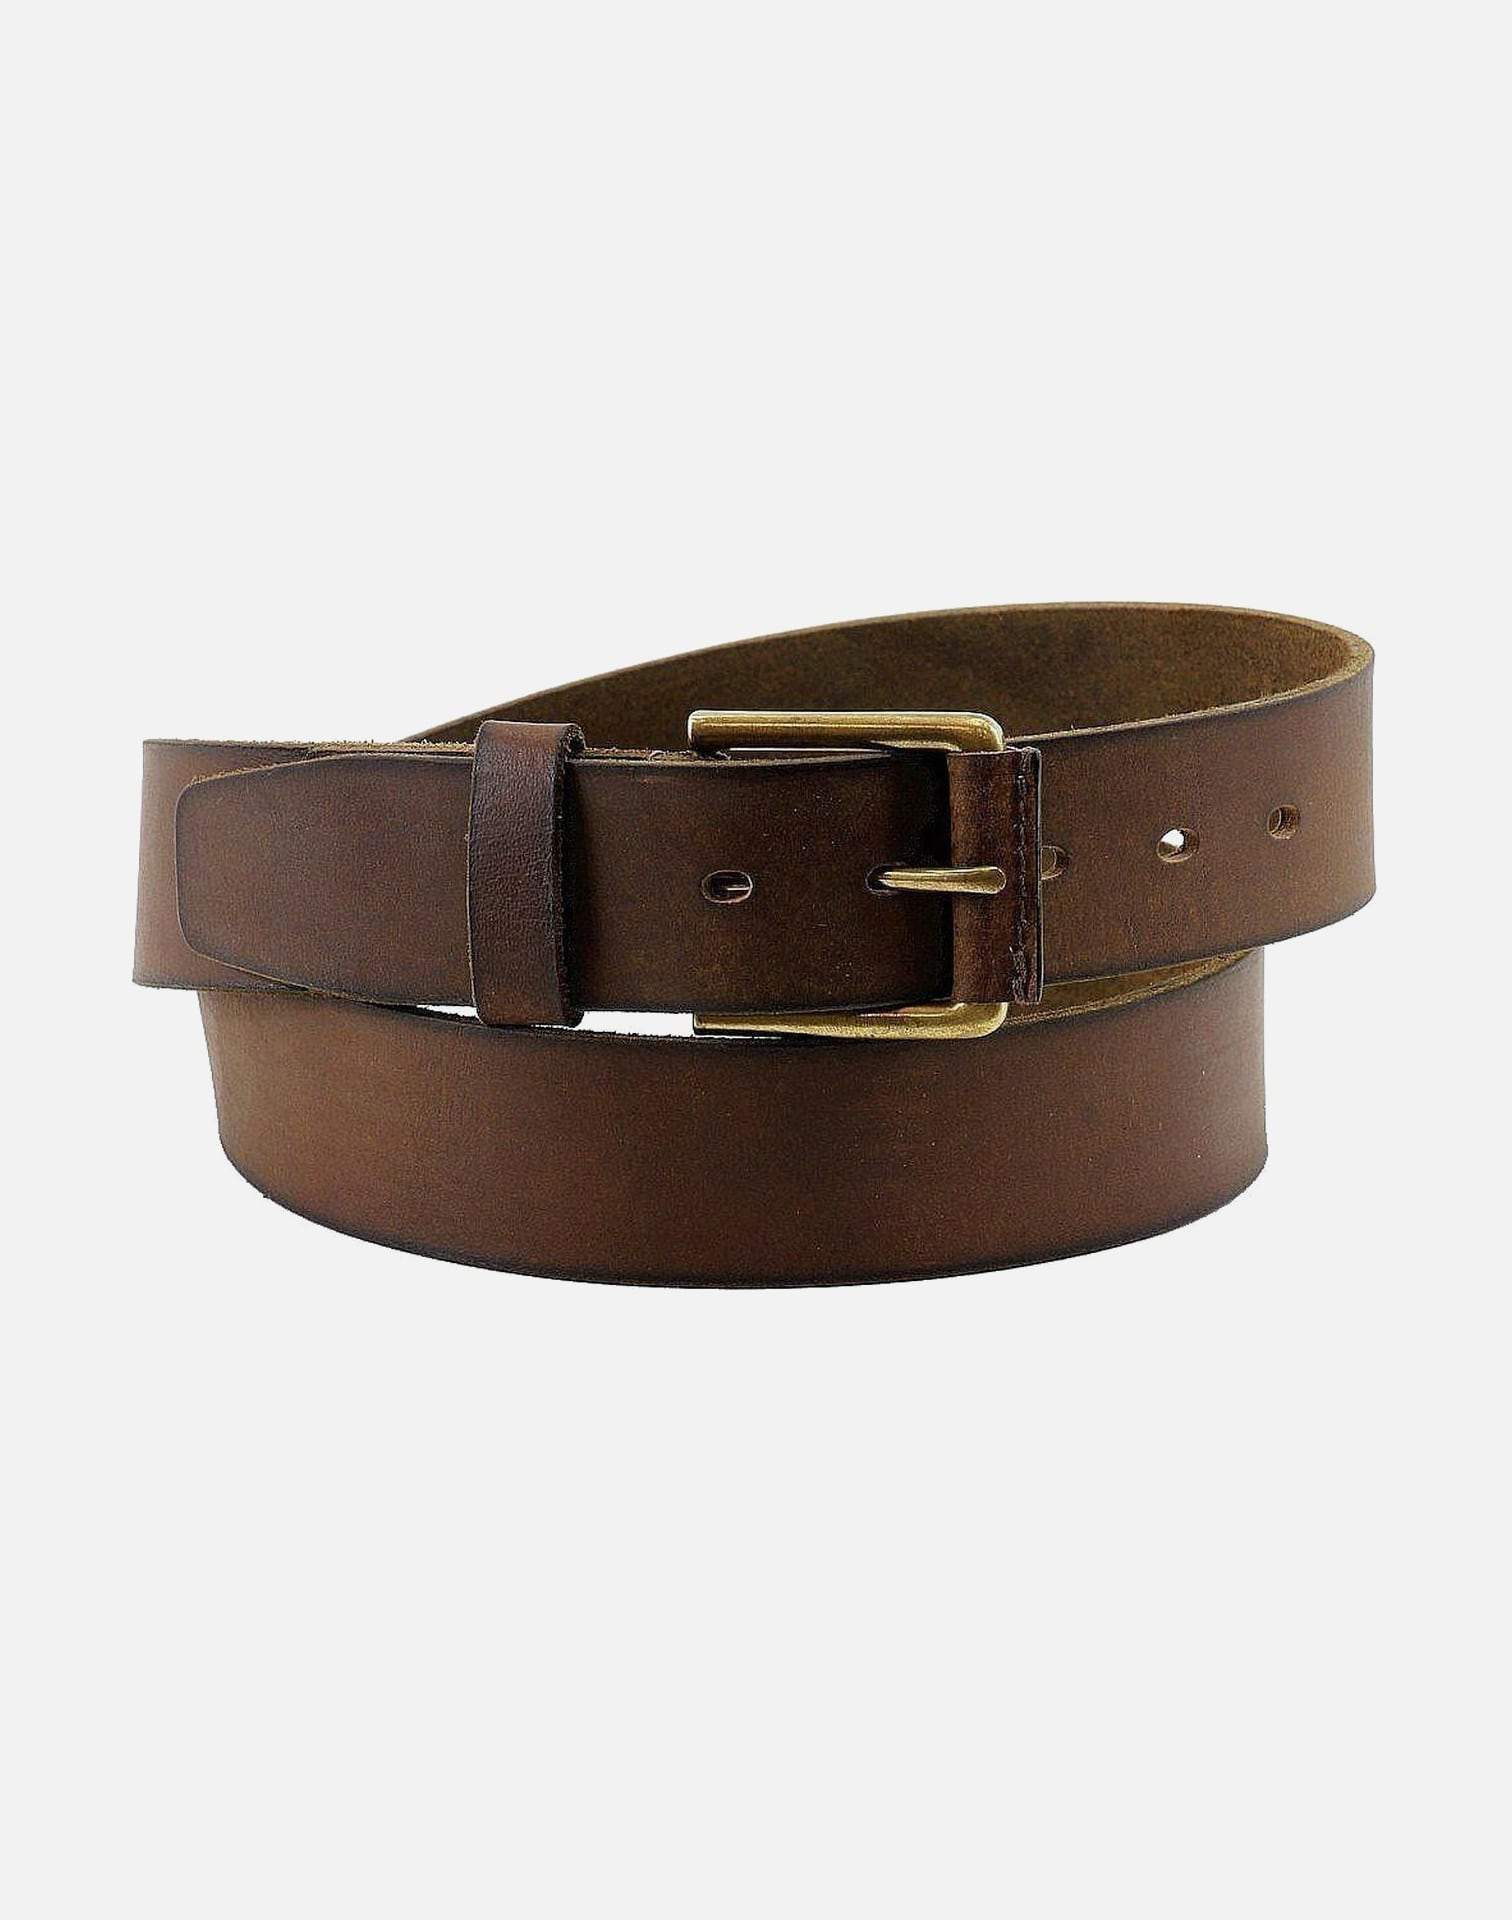 Timberland Casual Distressed Genuine Leather Belt